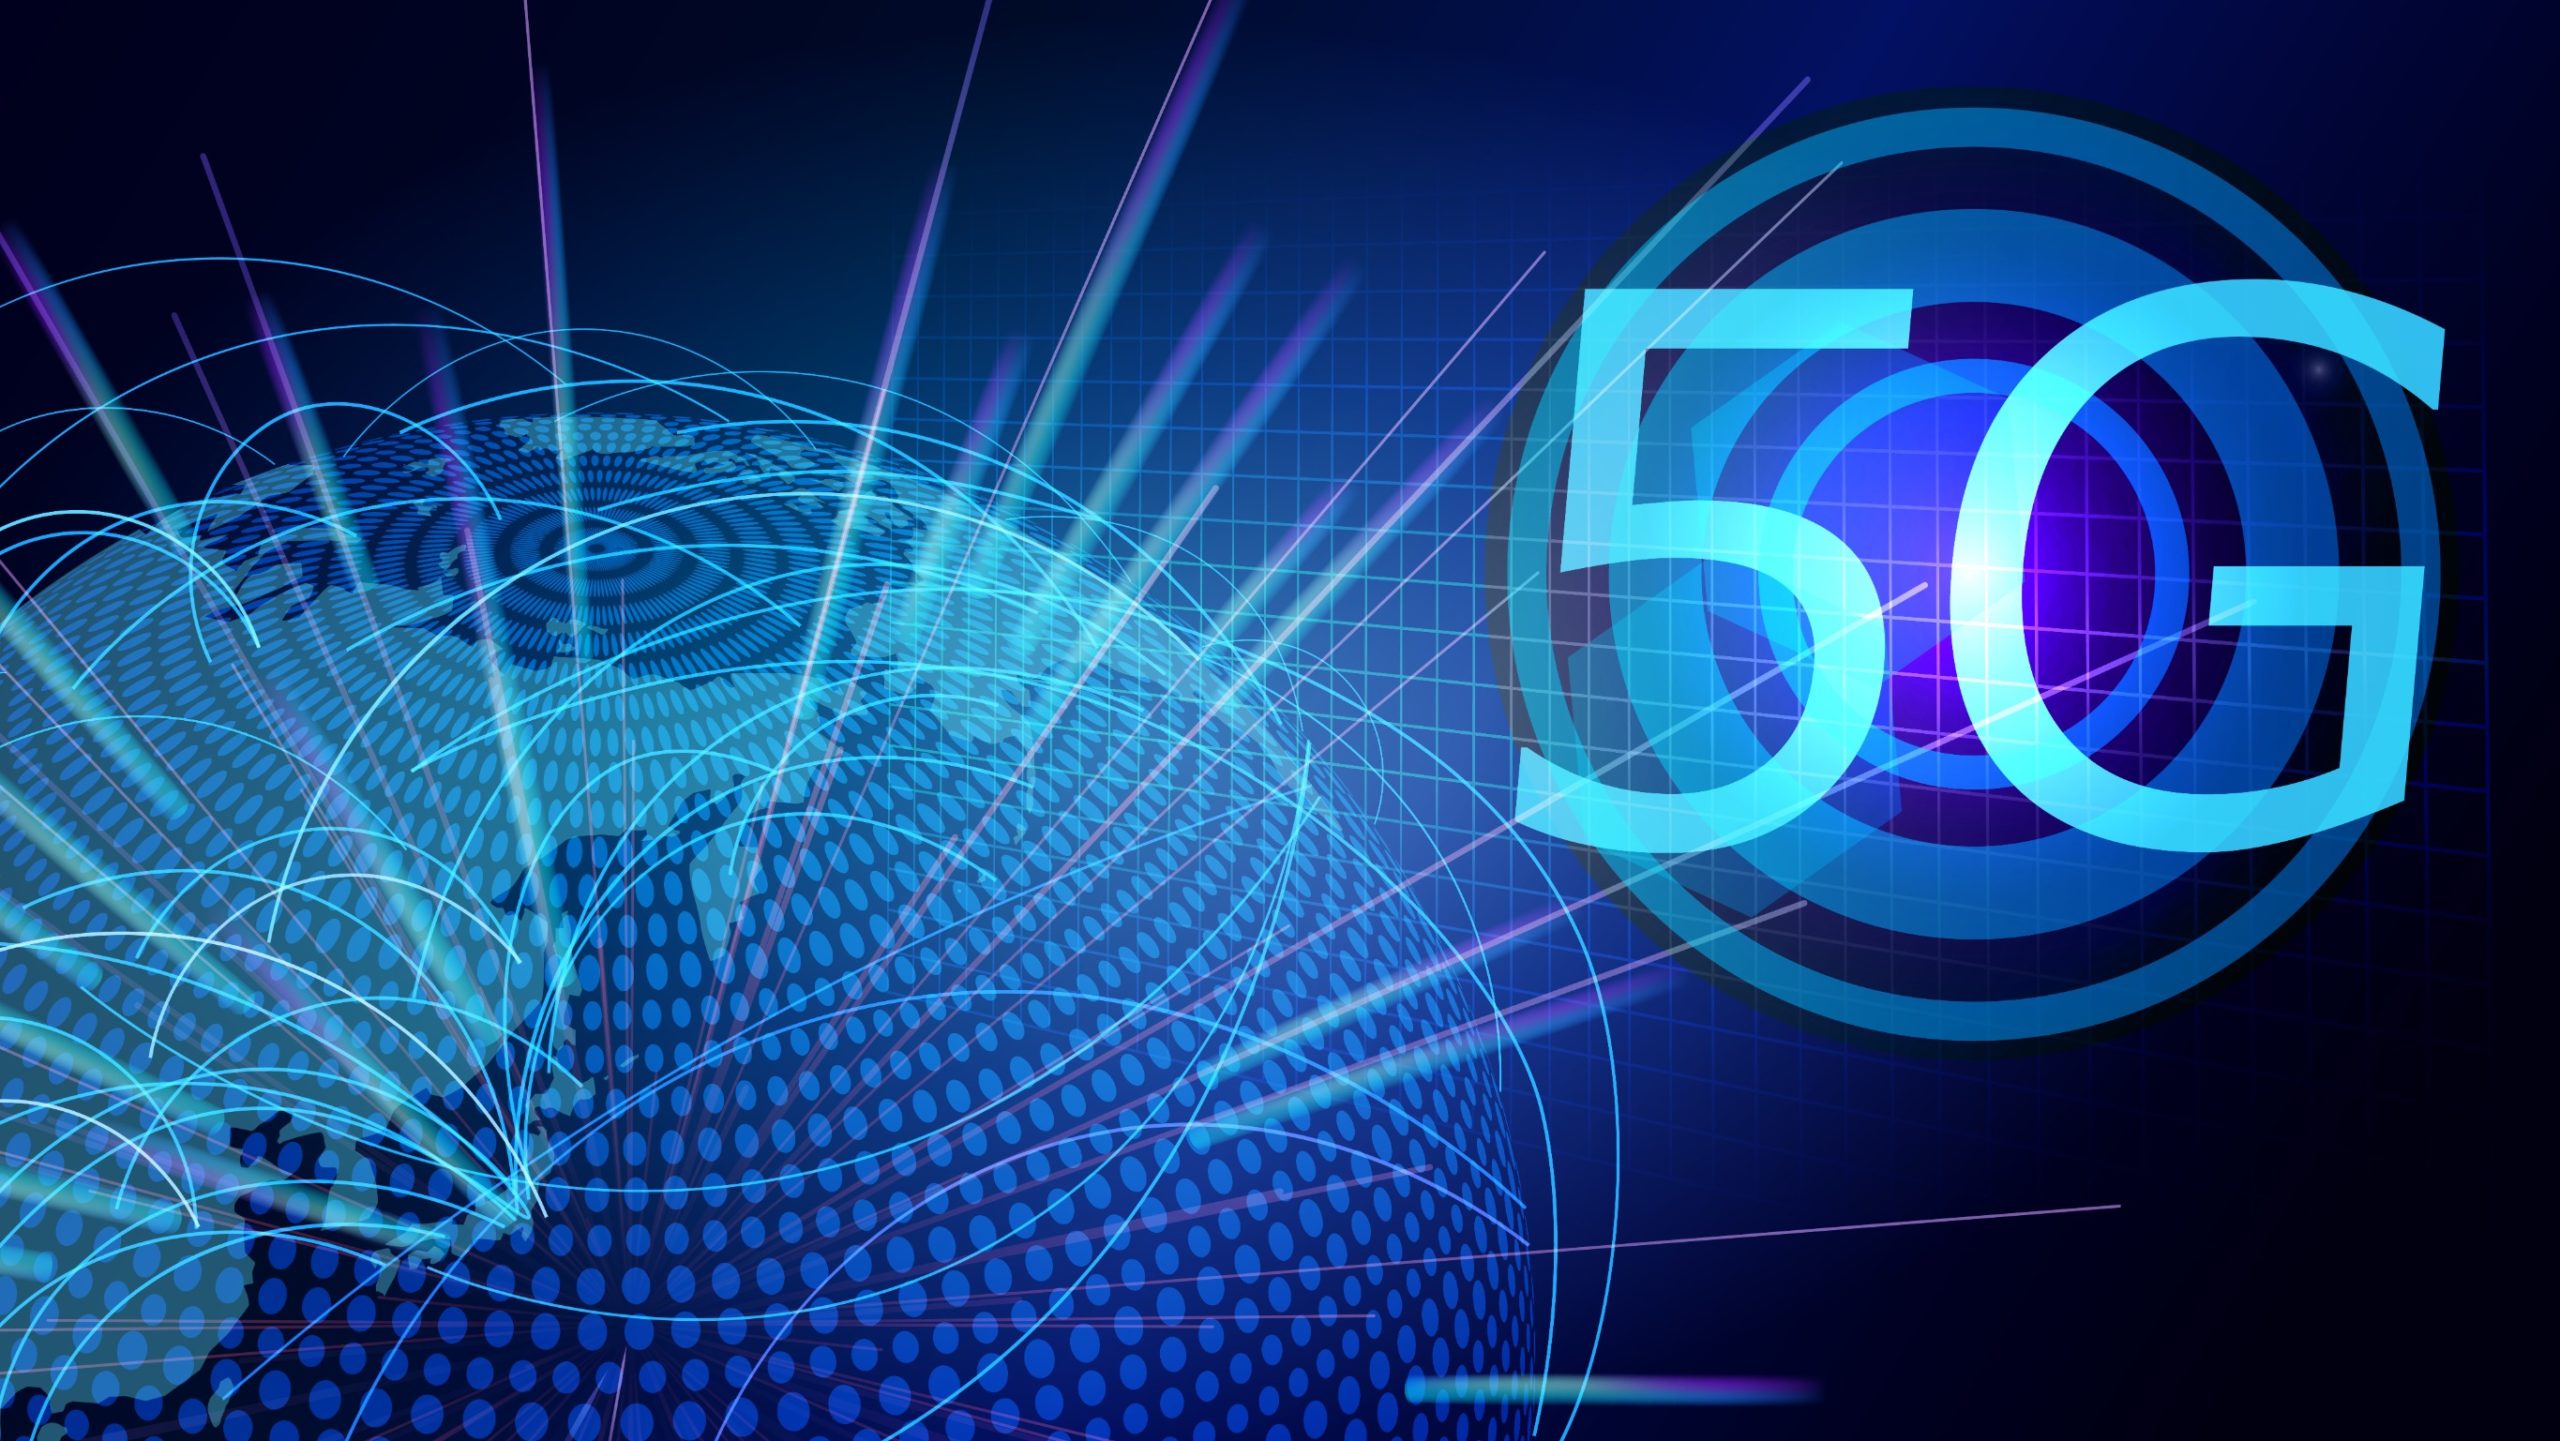 5G subscribers to reach 5.9 billion globally by end-2027: Report